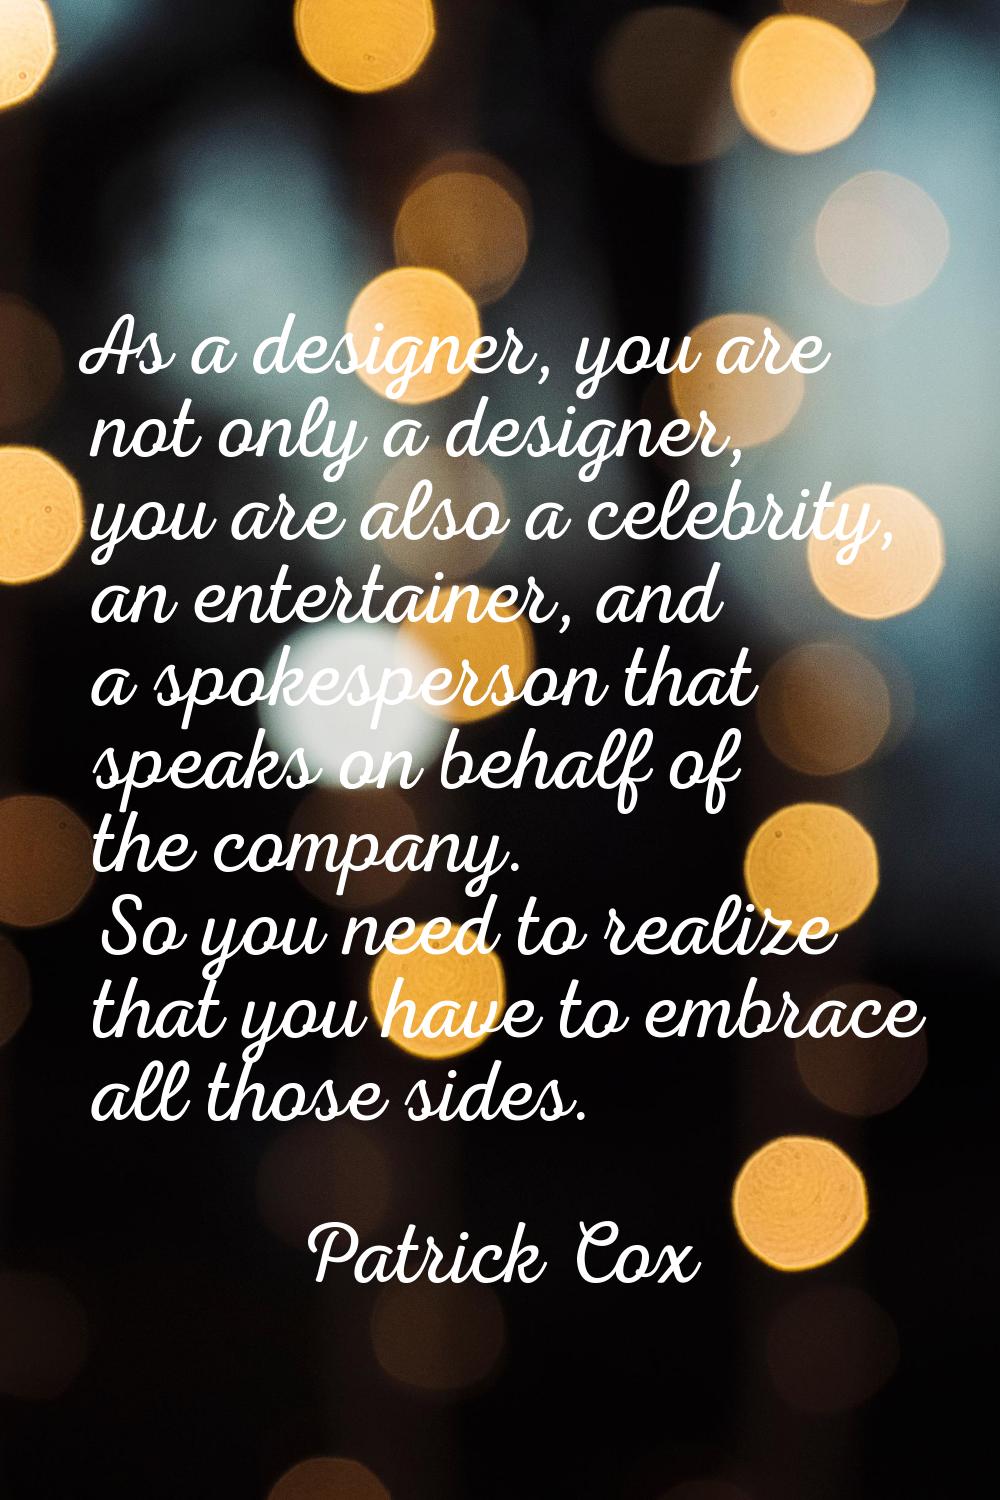 As a designer, you are not only a designer, you are also a celebrity, an entertainer, and a spokesp